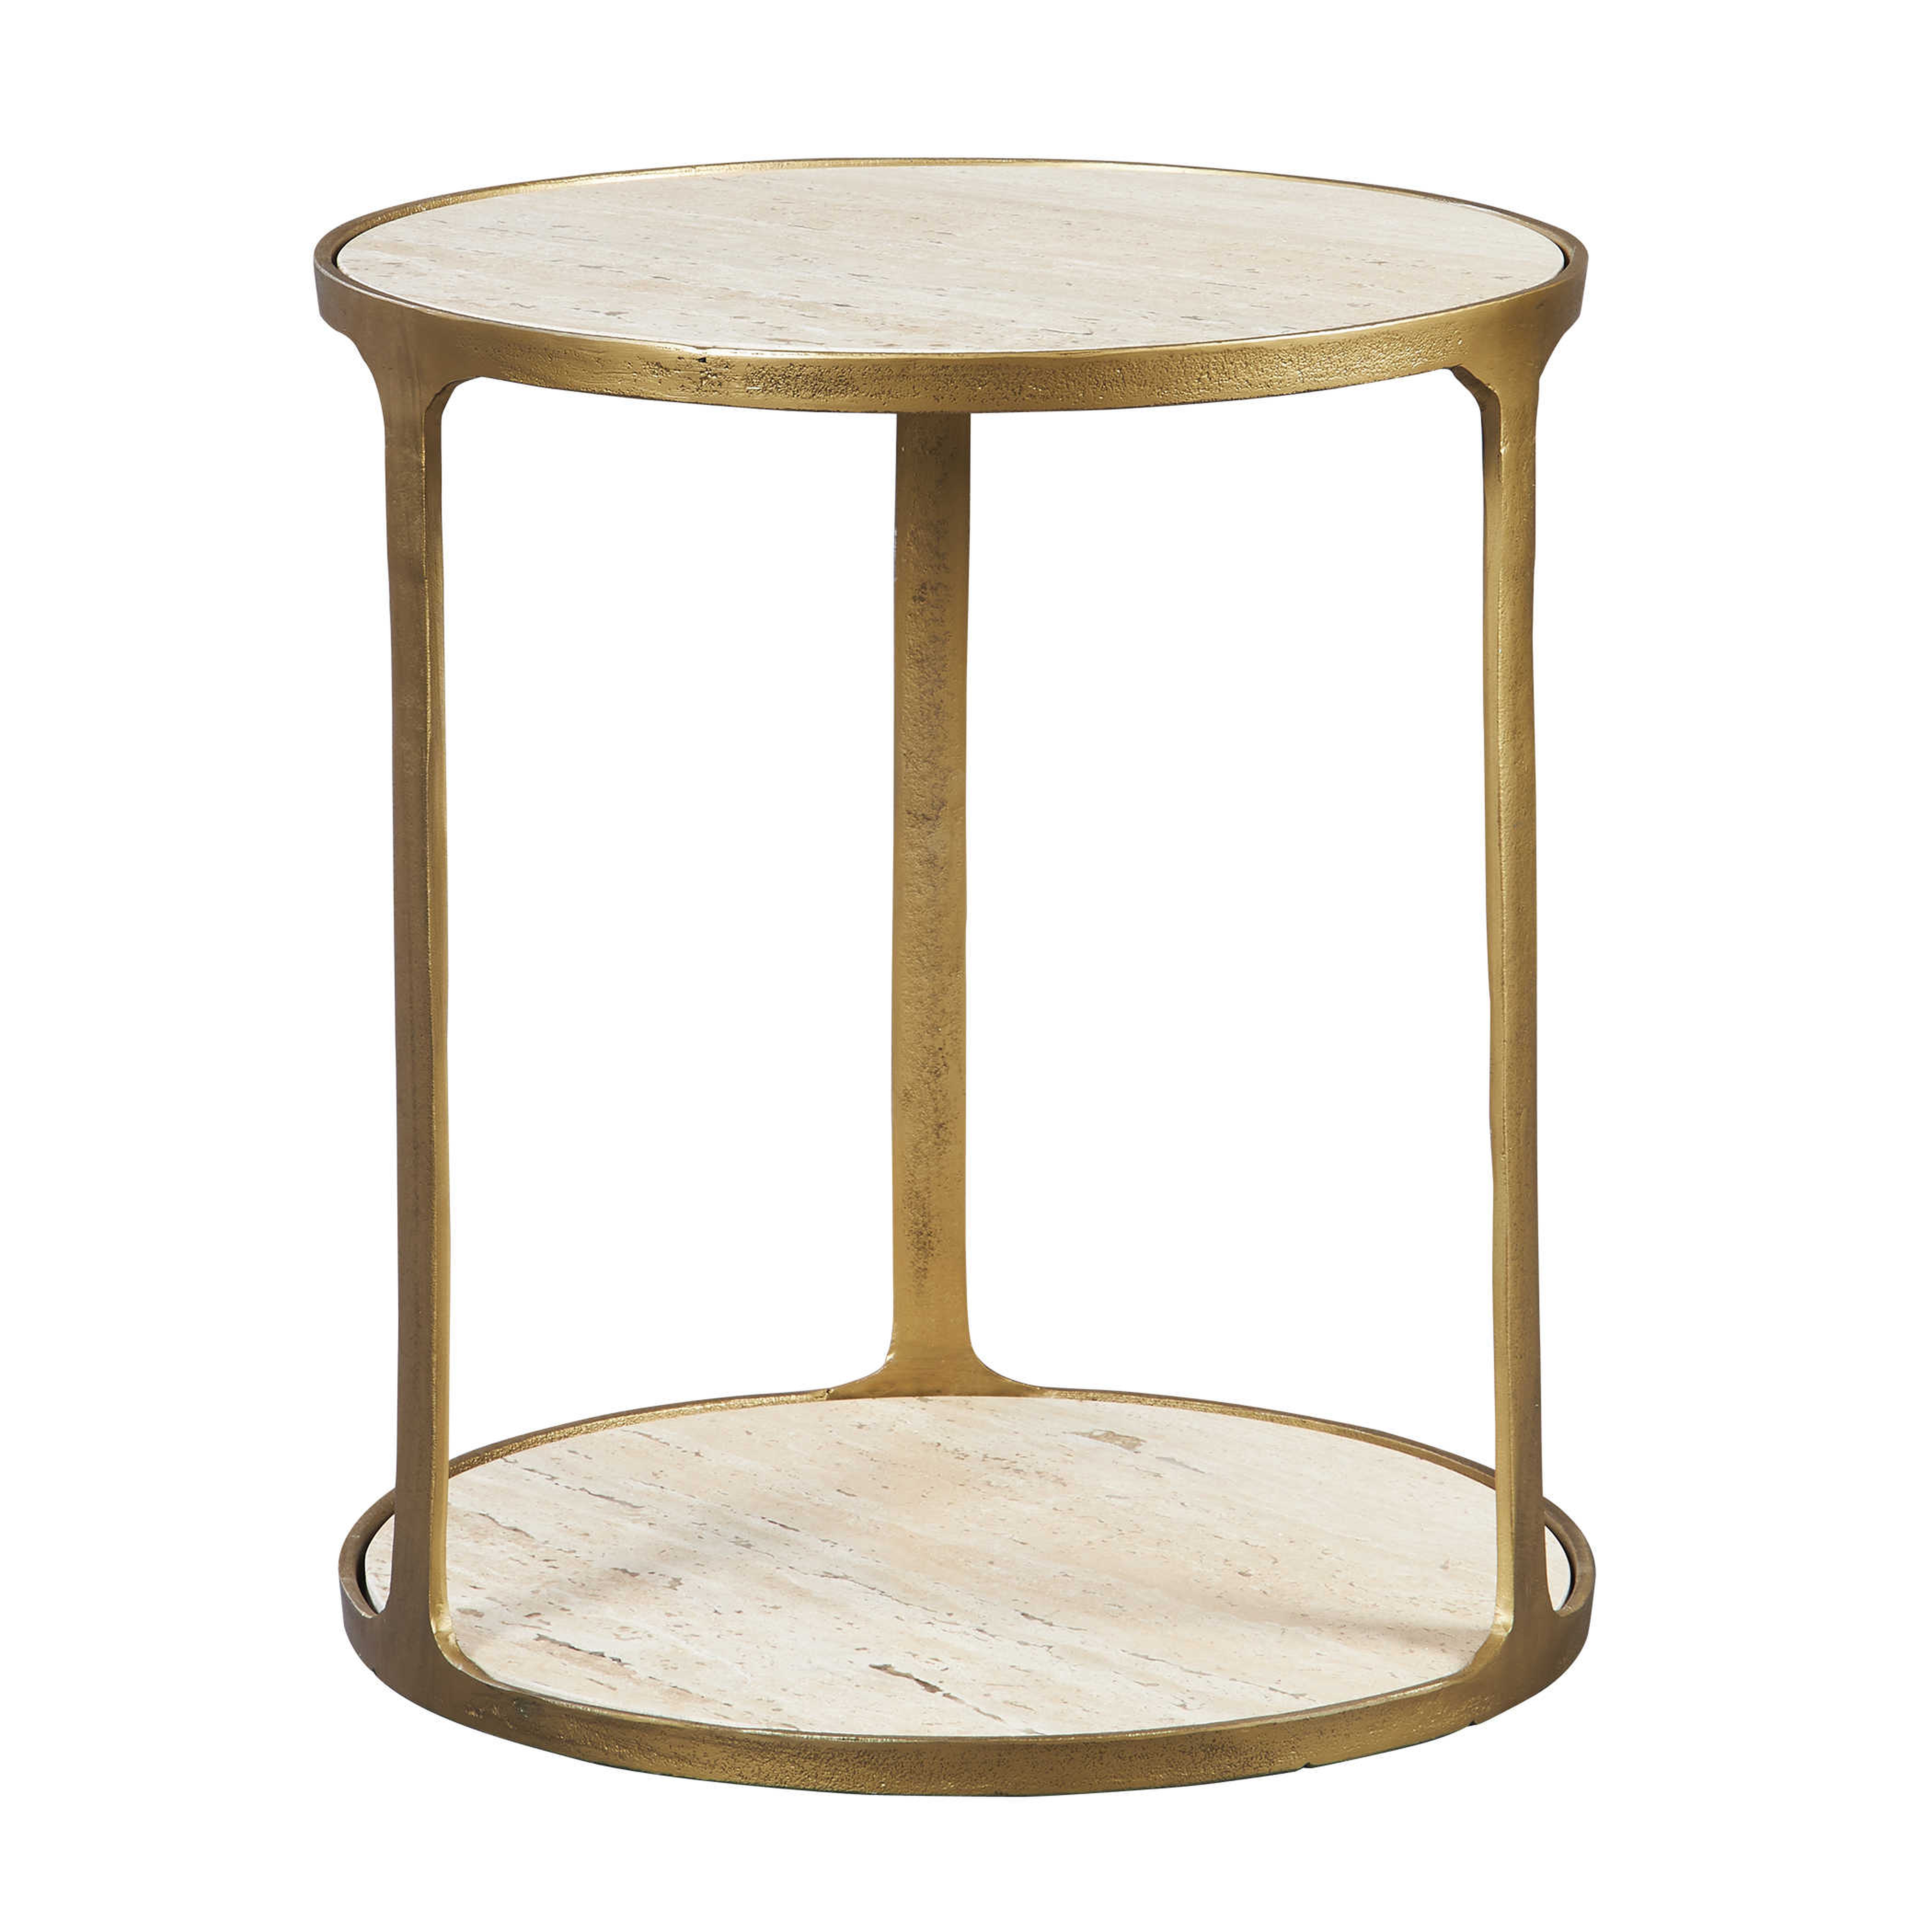 CLENCH SIDE TABLE, 2 CARTONS - Hudsonhill Foundry